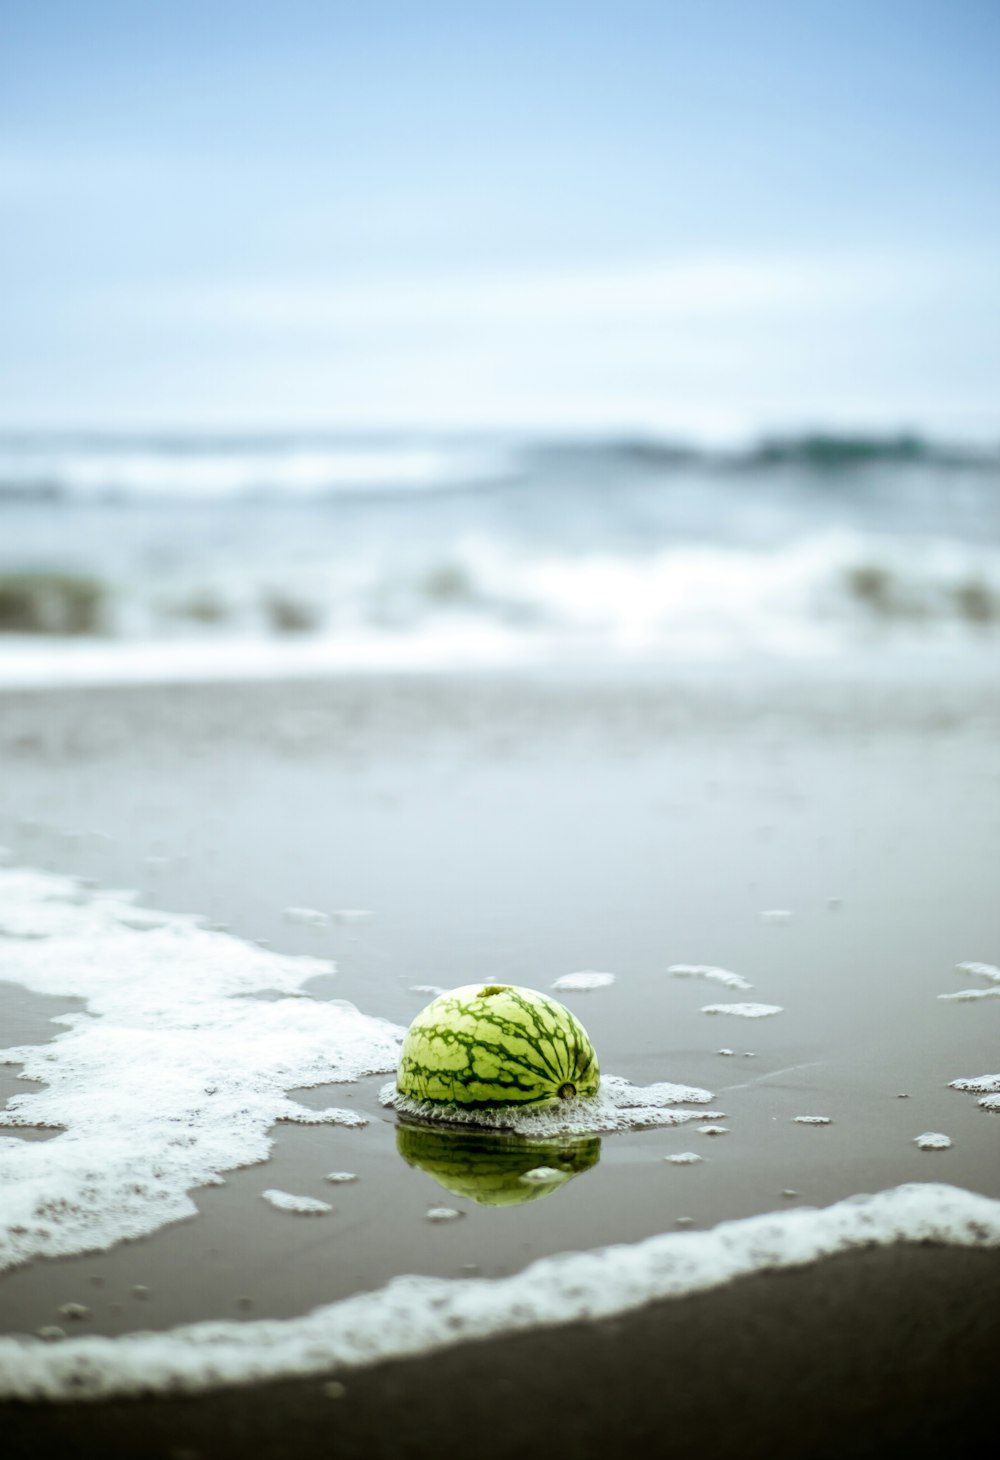 shallow focus photography of watermelon on body of water